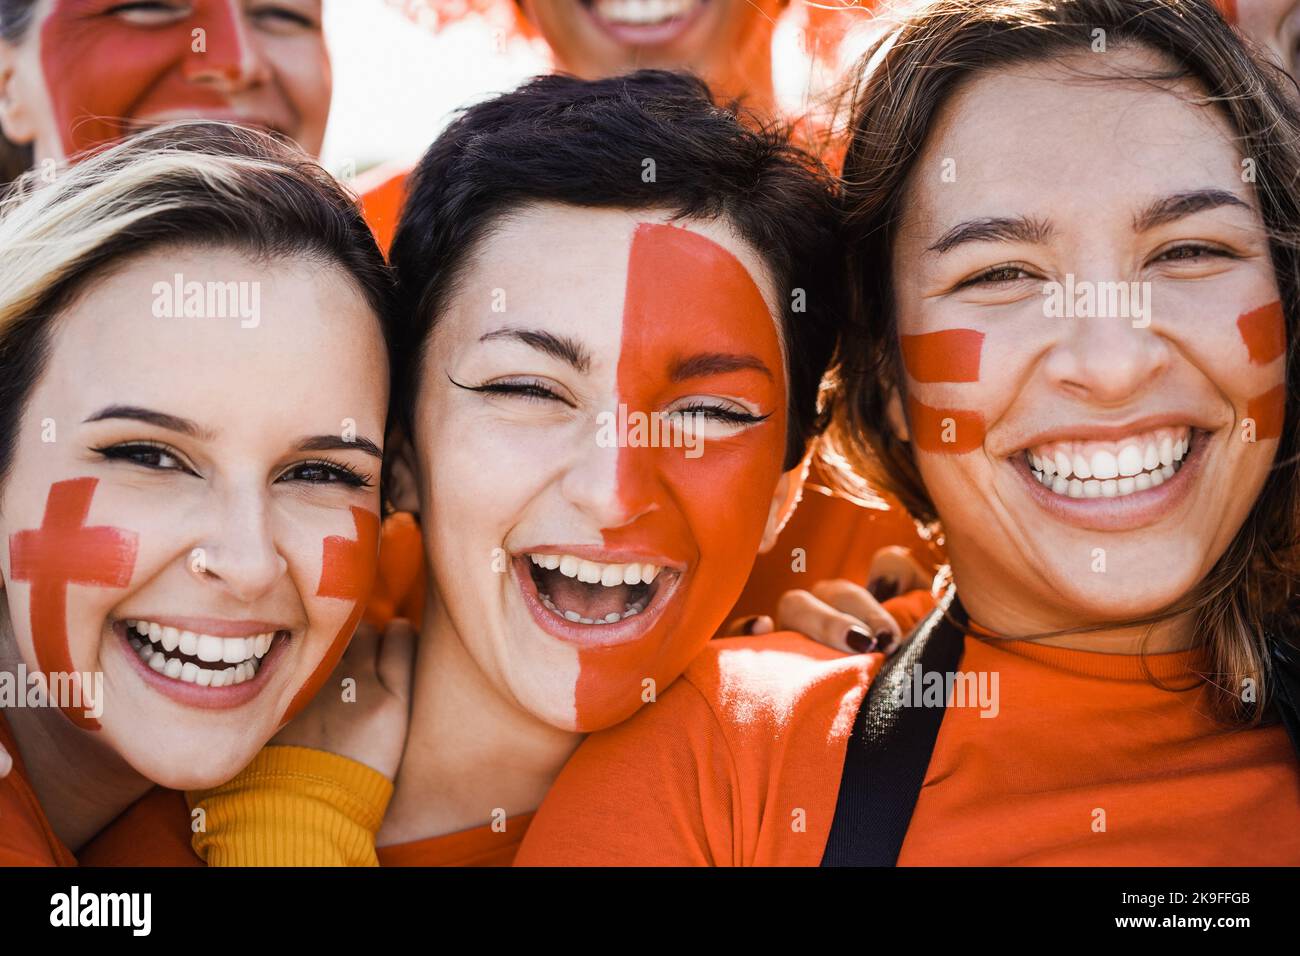 Orange sport fans having fun supporting their team - Football supporters having fun at competition event - Focus on left girl eye Stock Photo